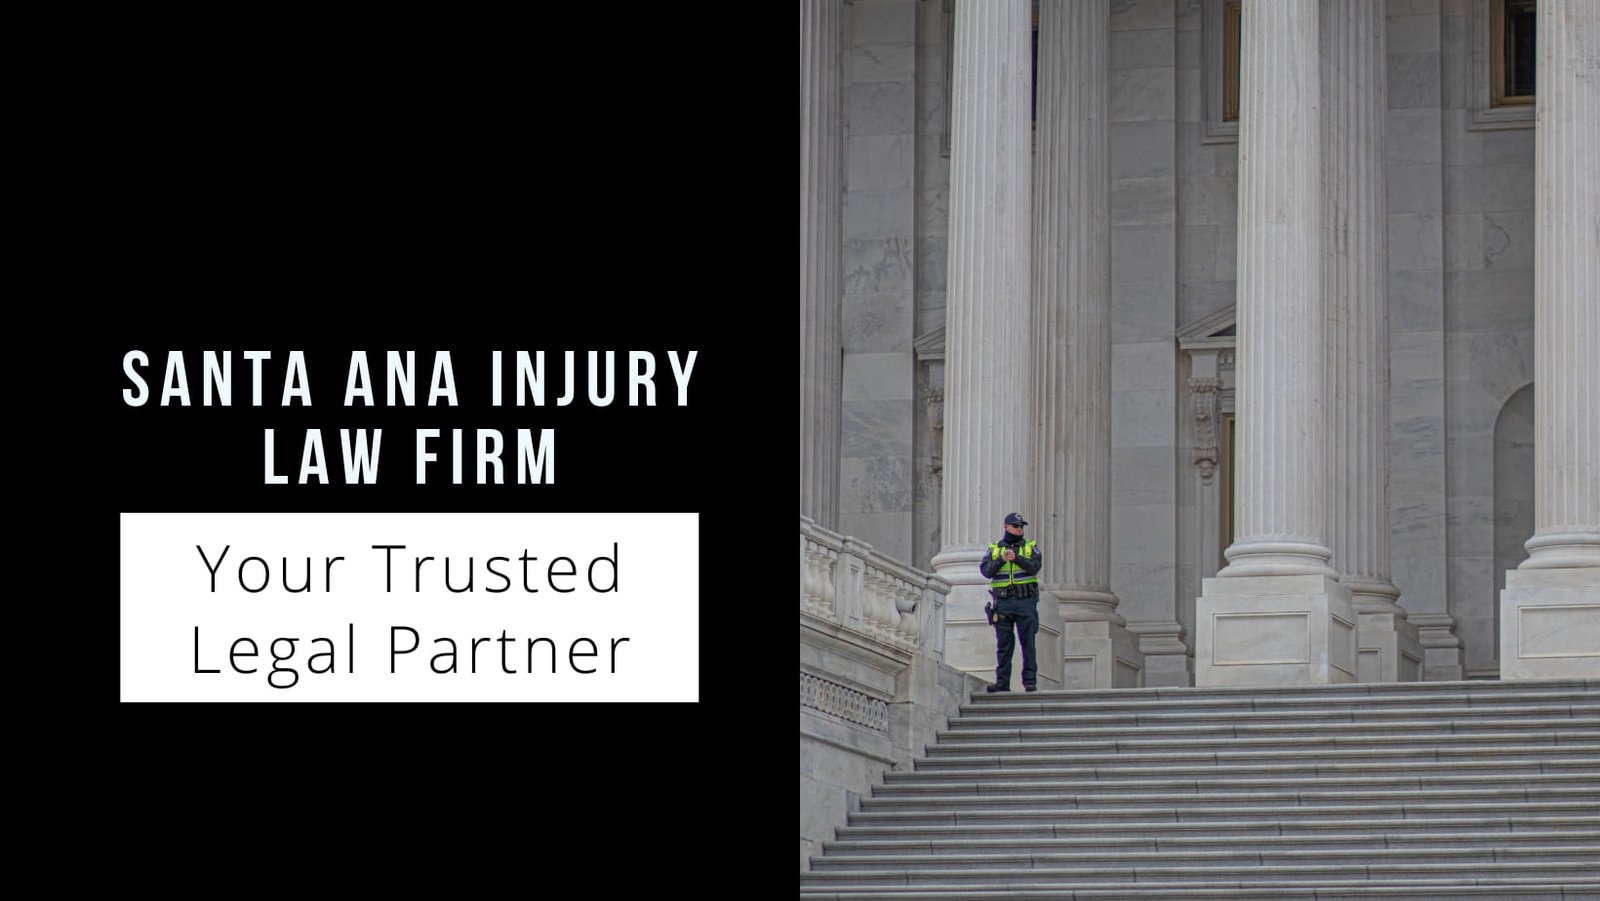 Santa Ana Injury Law Firm: Your Trusted Legal Partner